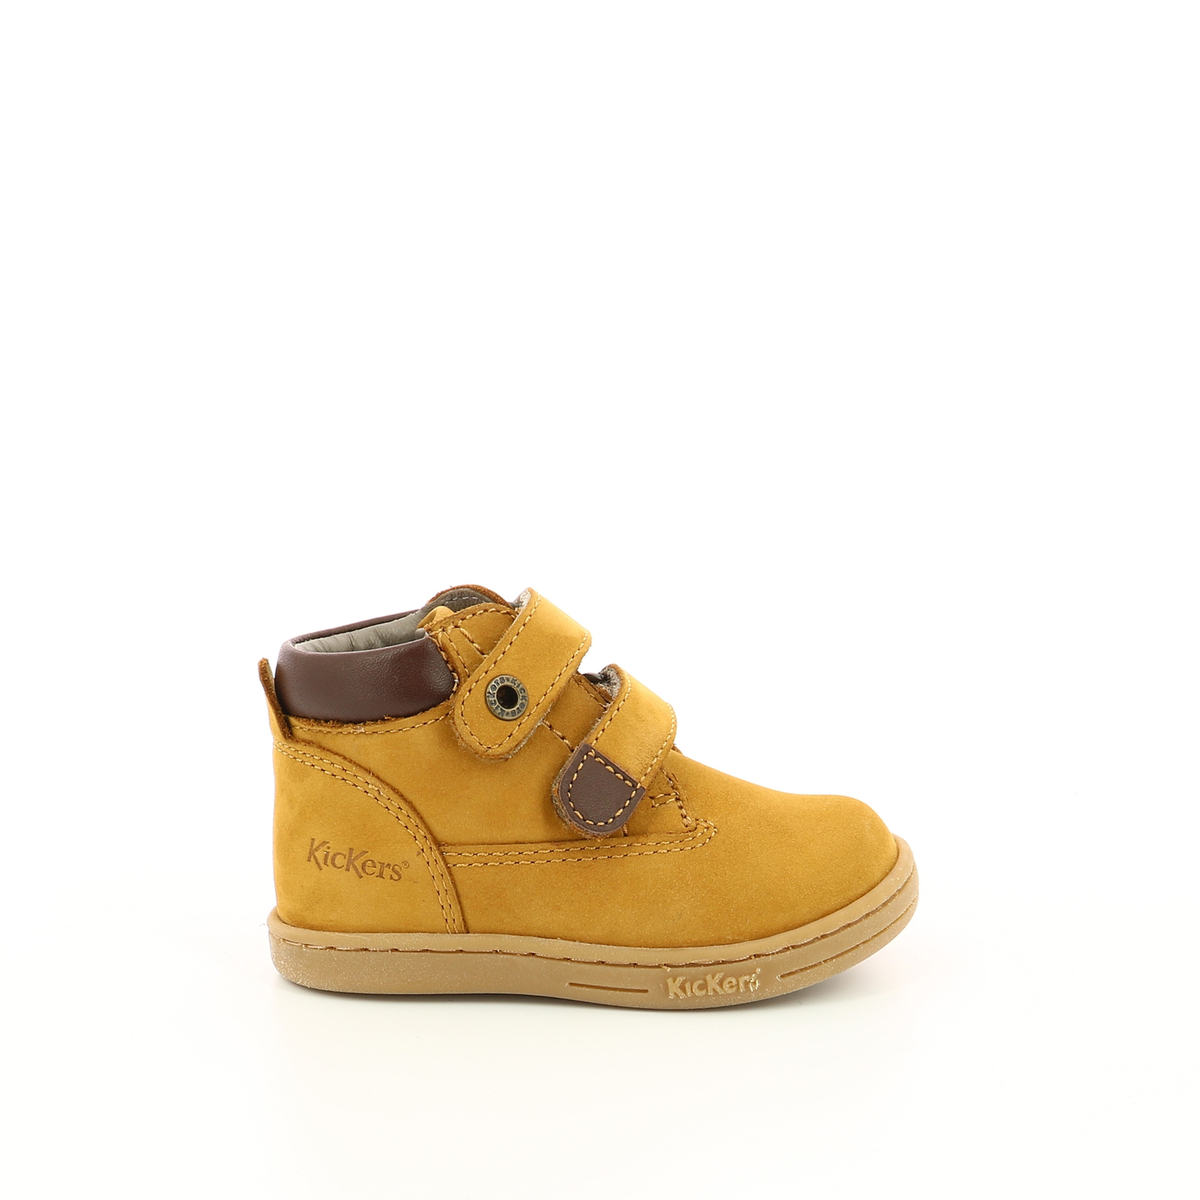 Kids Tackeasy Touch ’n’ Close Ankle Boots